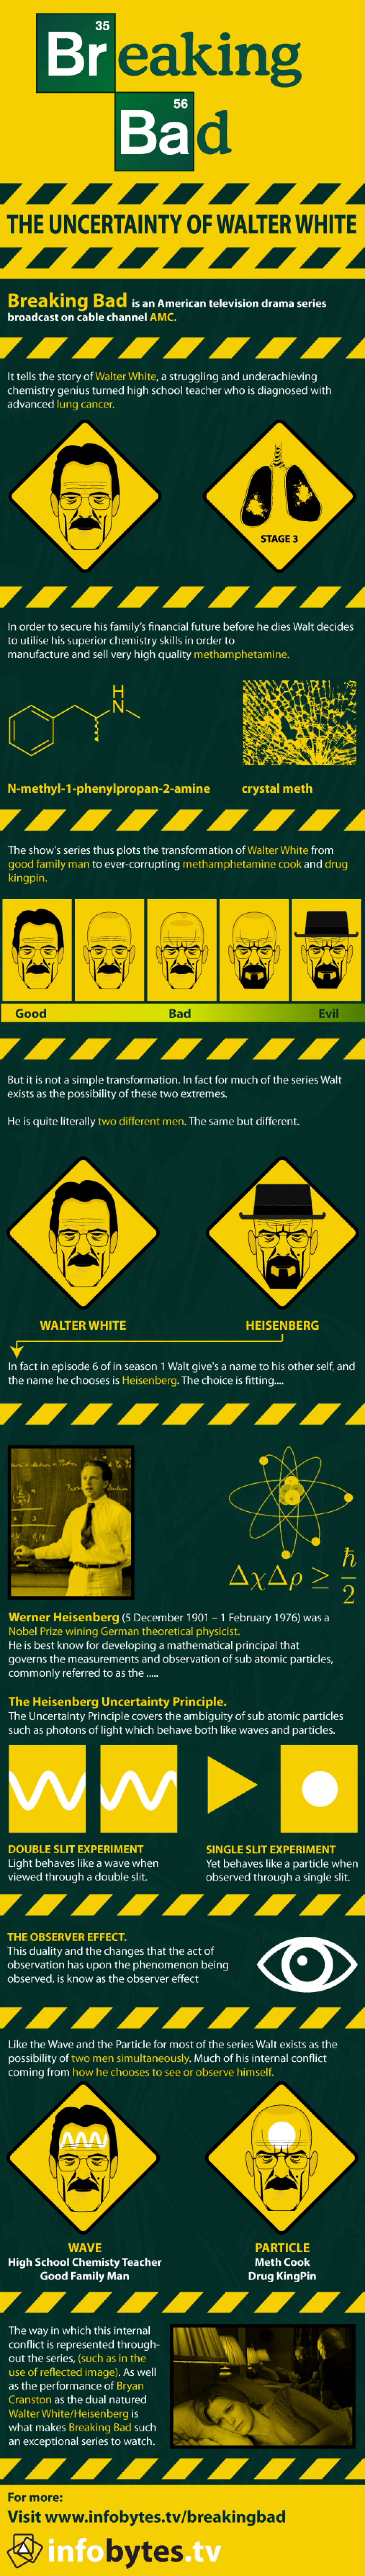 BREAKING BAD: THE UNCERTAINTY OF WALTER WHITE Infographic